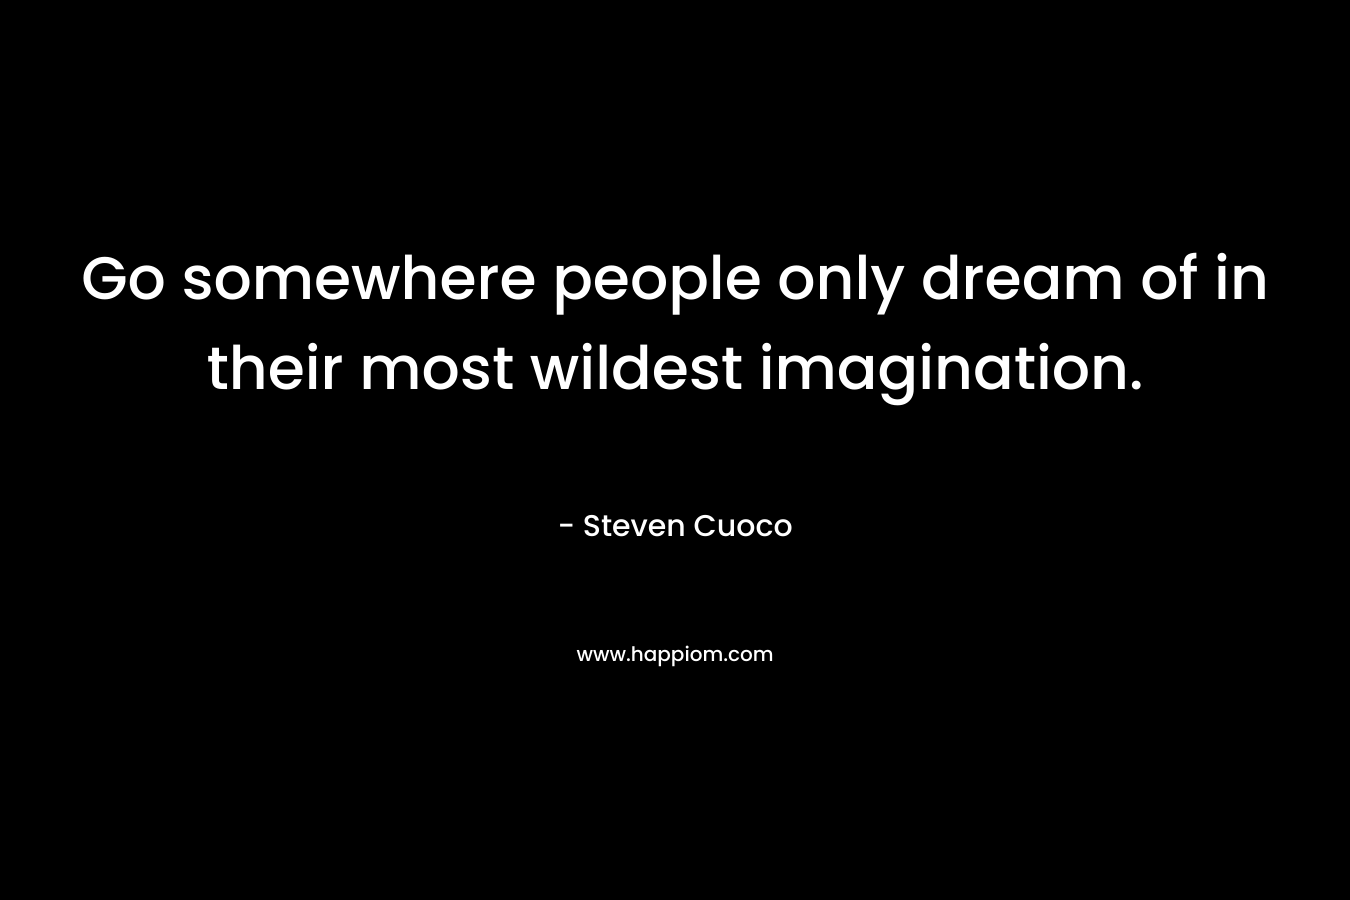 Go somewhere people only dream of in their most wildest imagination.